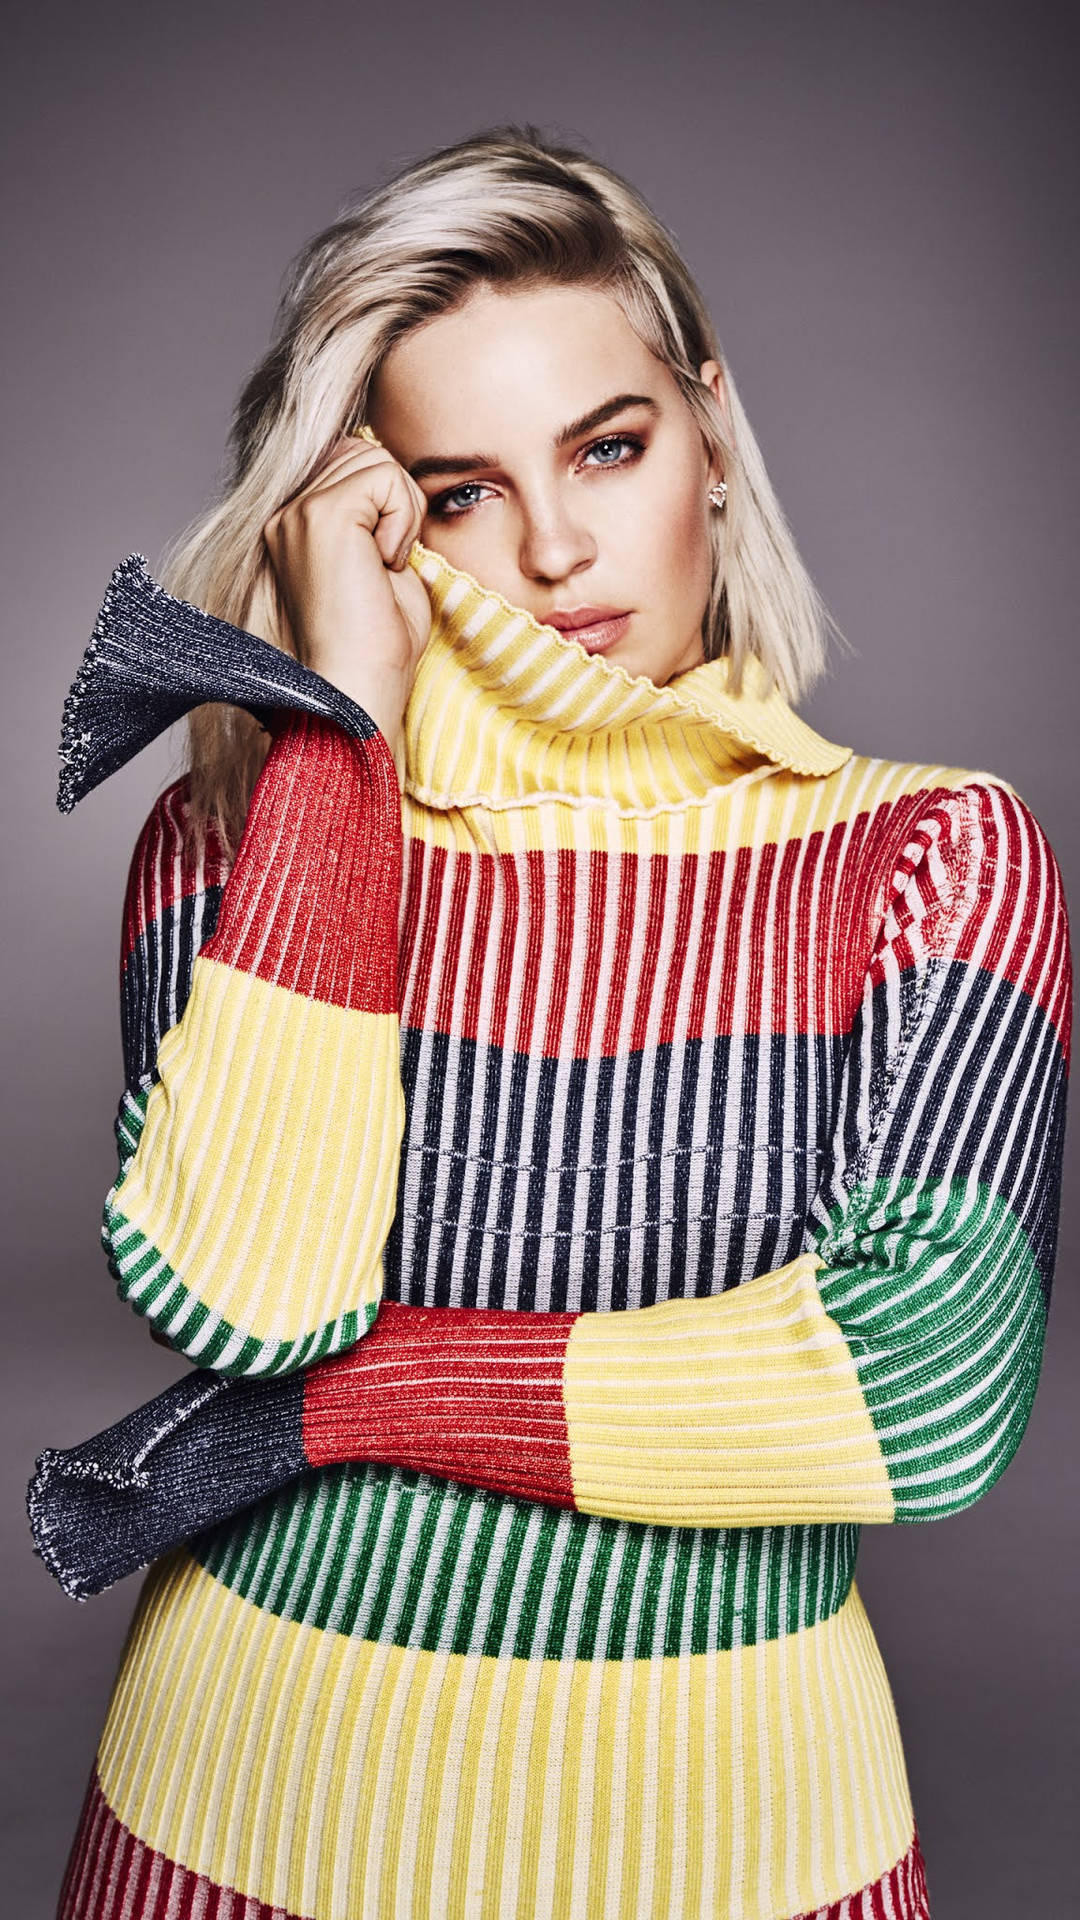 Anne-marie Colorful Sweater